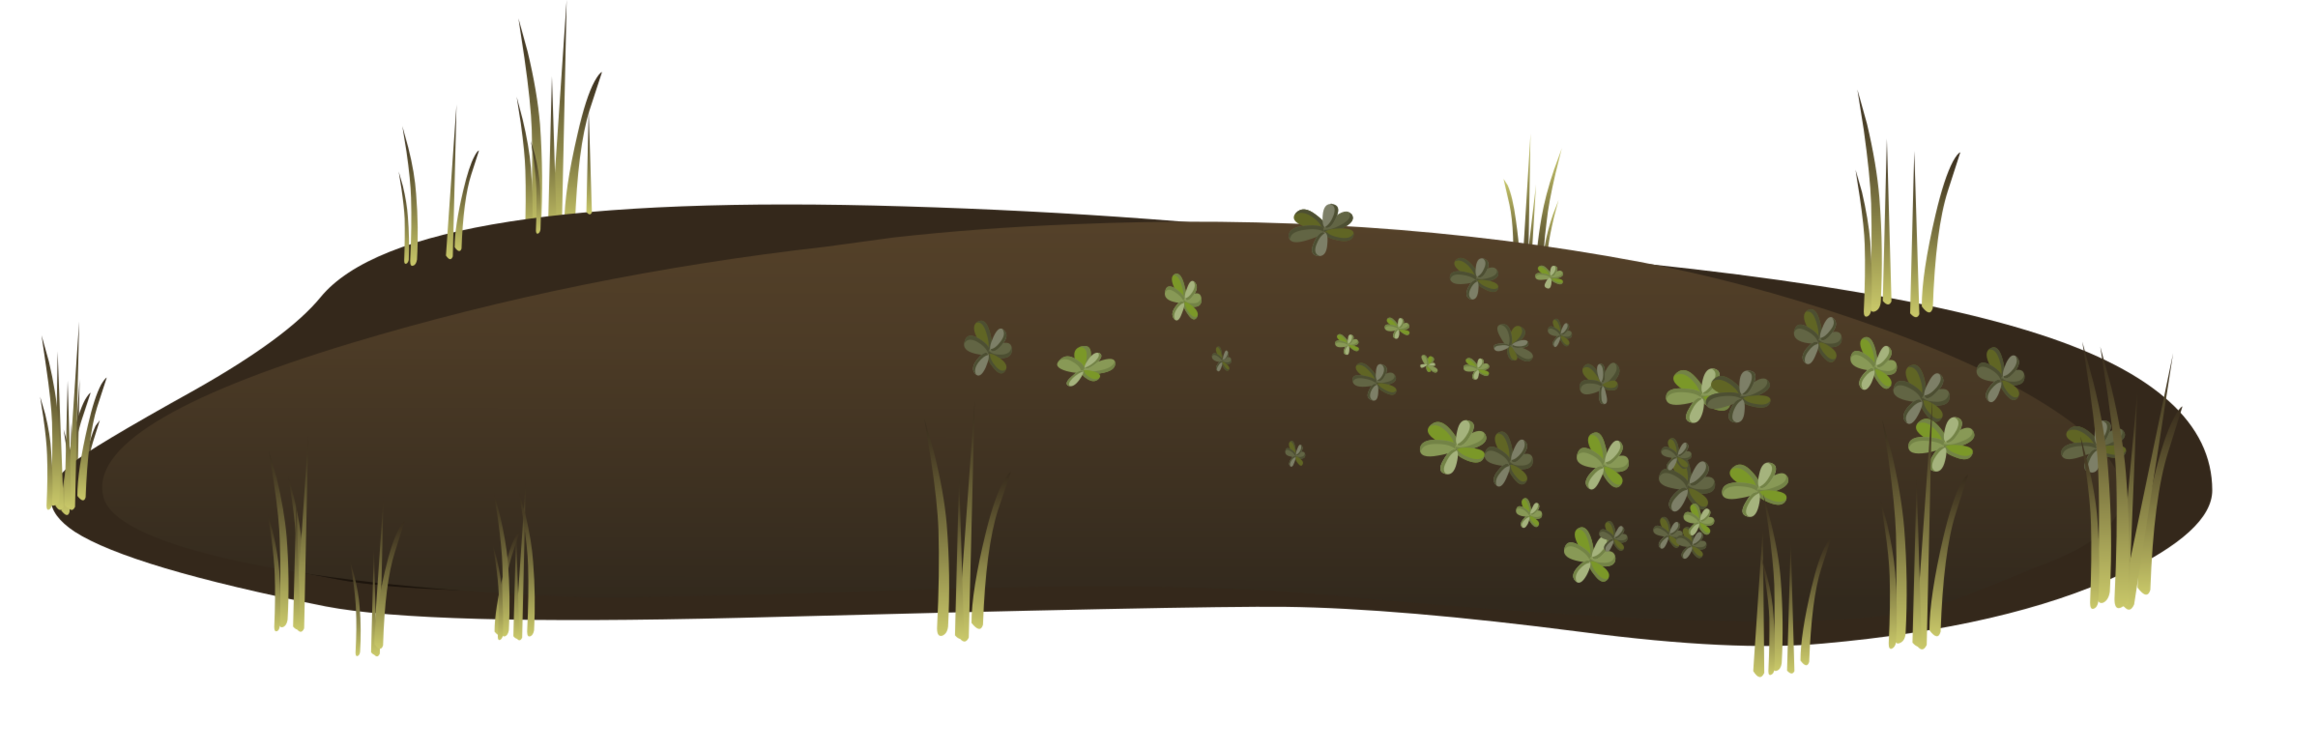 Grass,Computer Icons,Peat